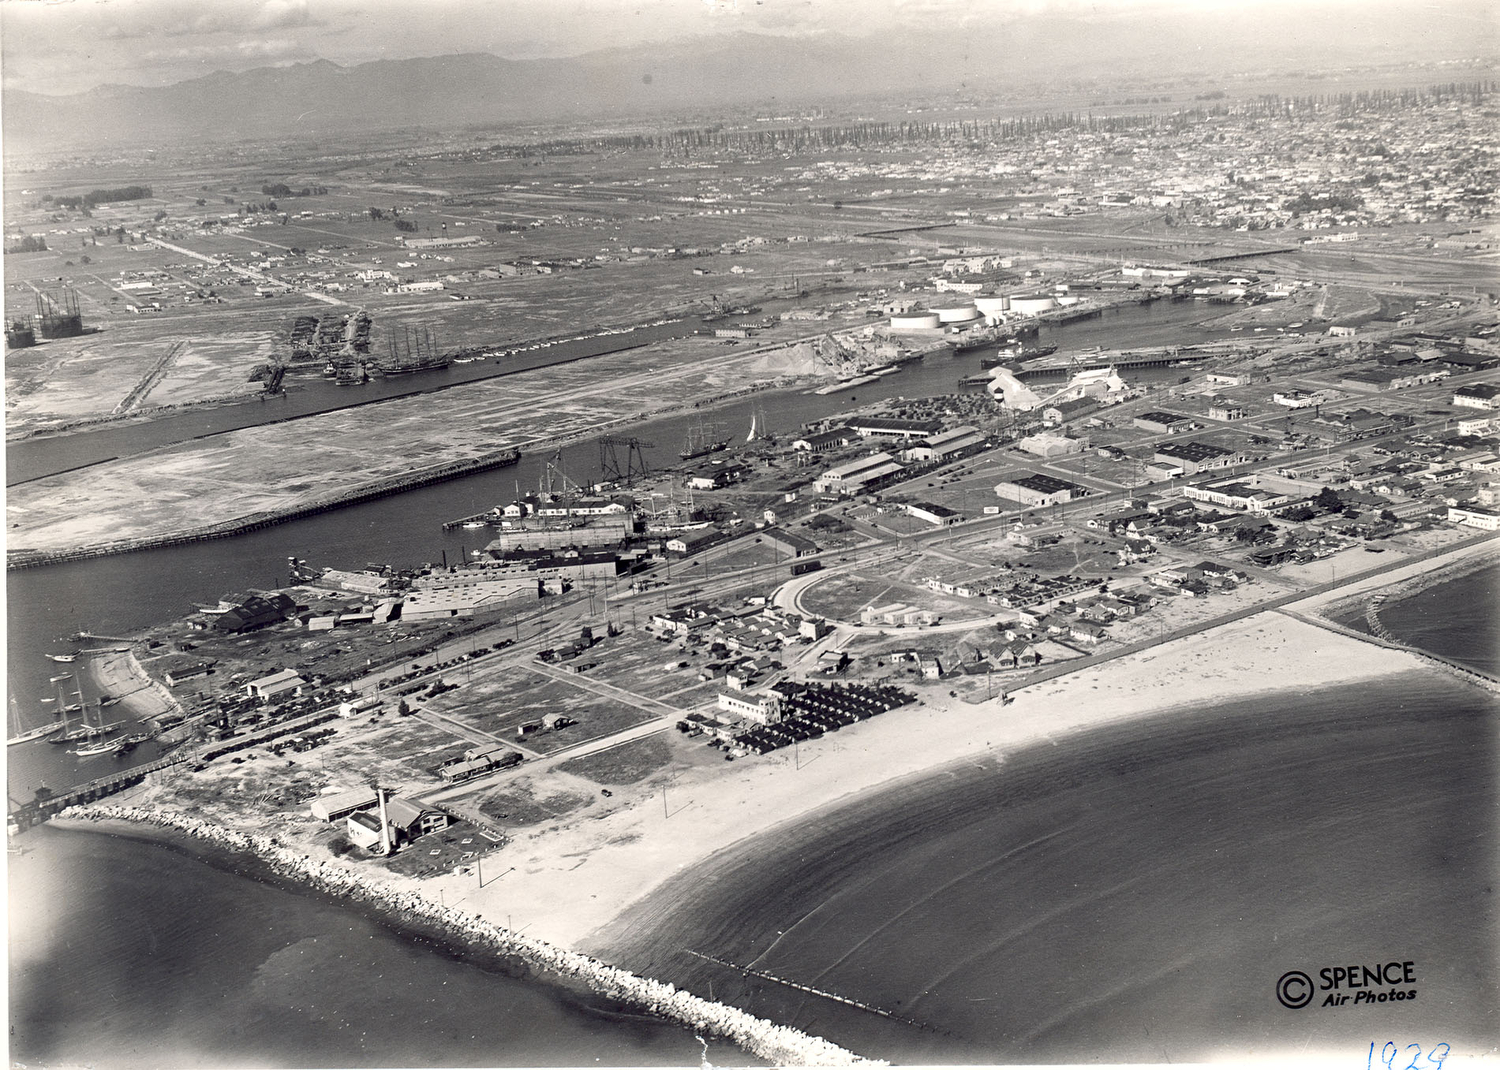 An aerial view of the Port, 1926.